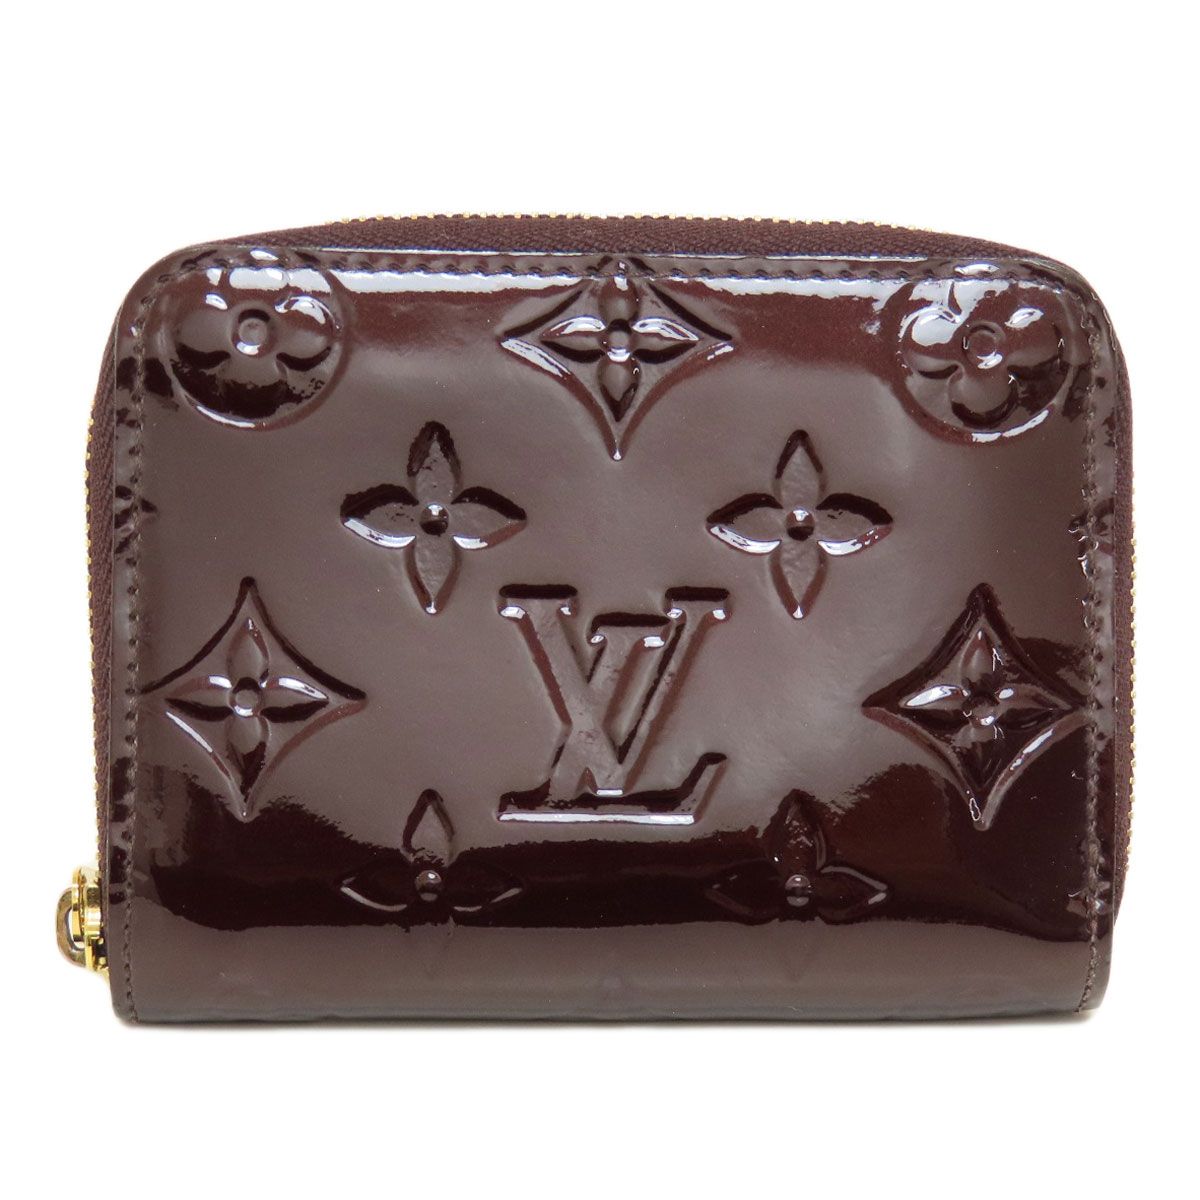 LOUIS VUITTON ルイヴィトン M93607 ジッピー・コインパース